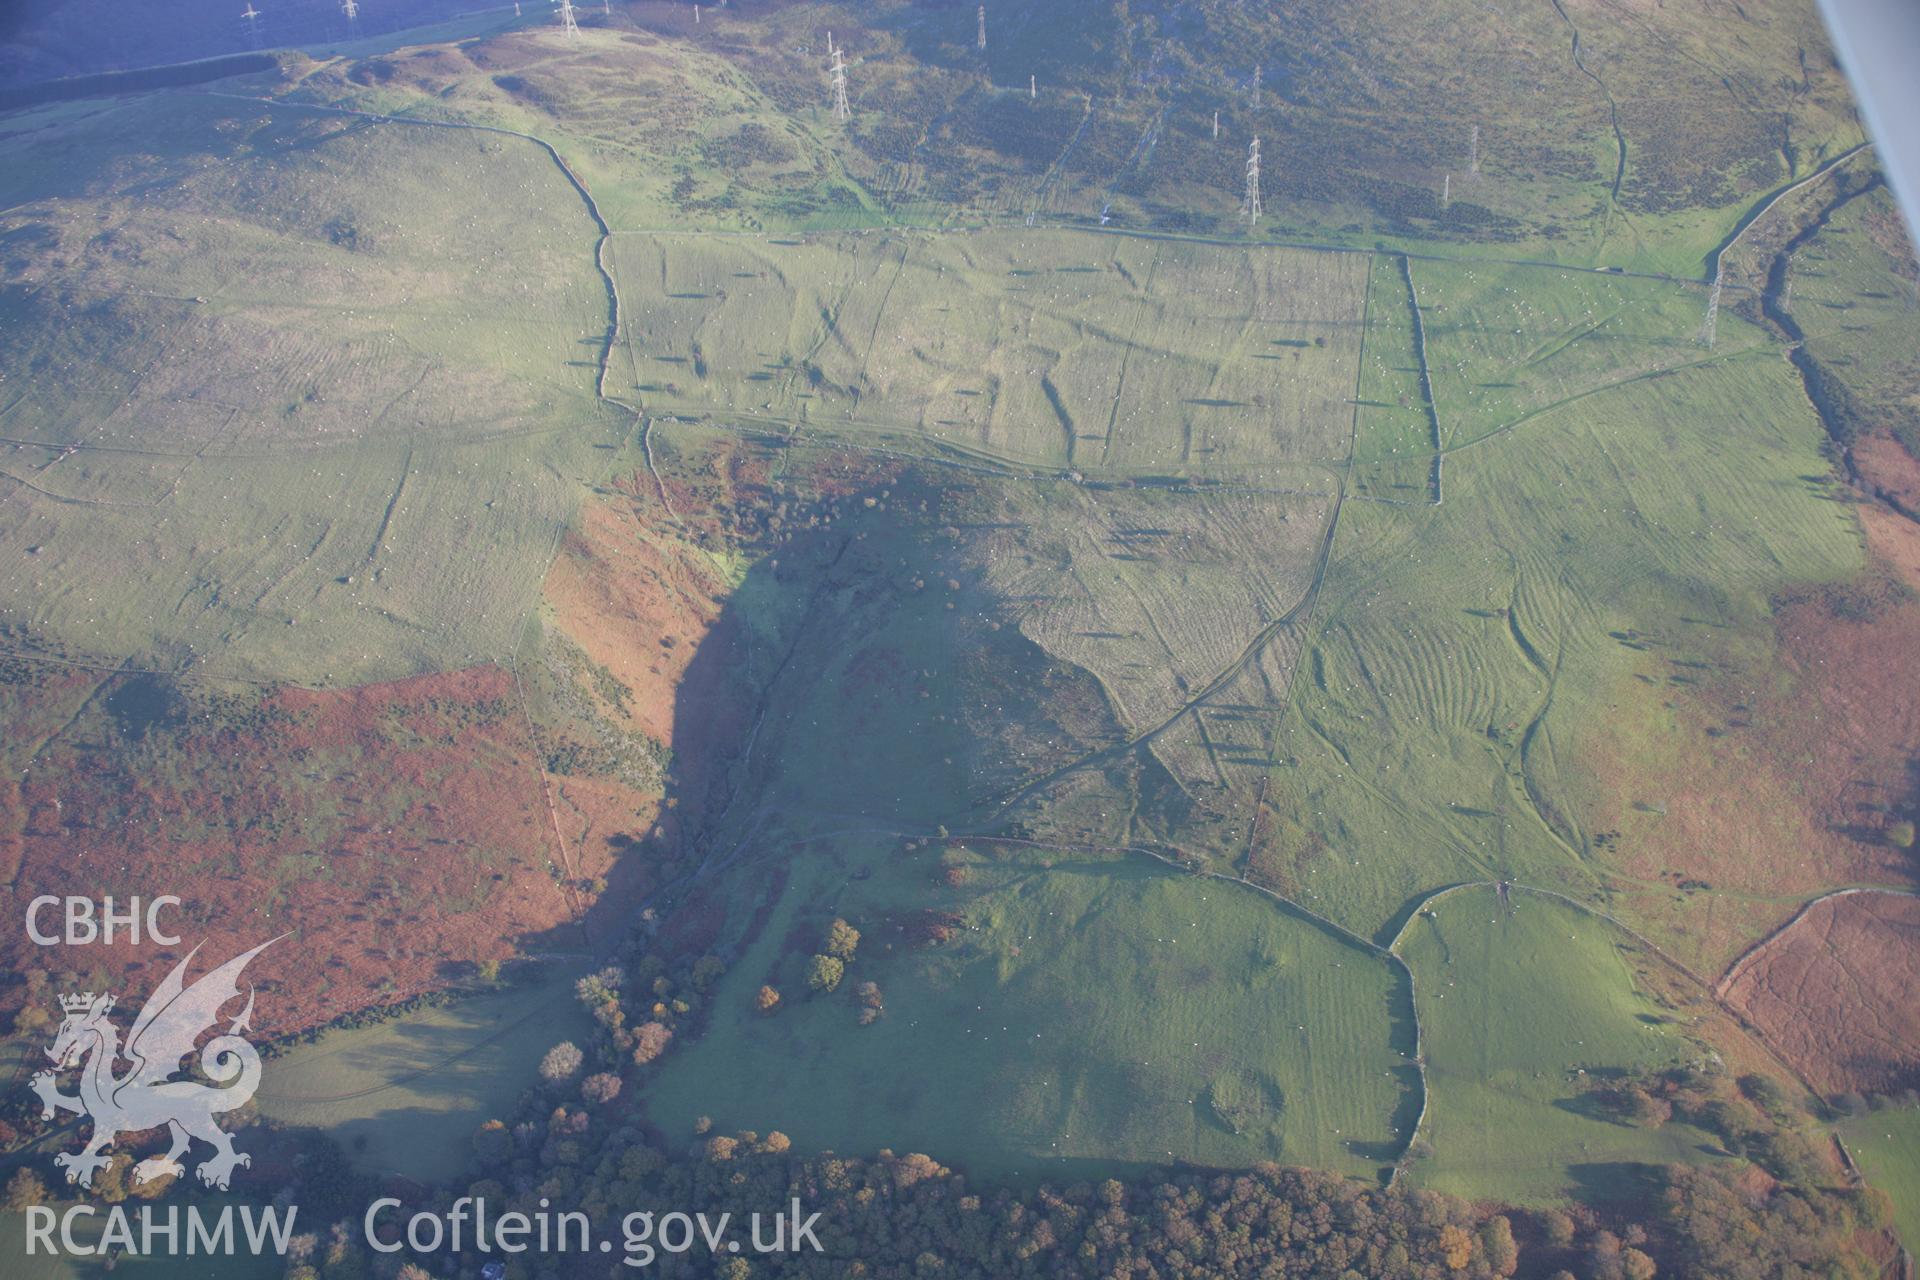 RCAHMW colour oblique aerial photograph of Ffridd Ddu Field System from the north-west. Taken on 21 November 2005 by Toby Driver